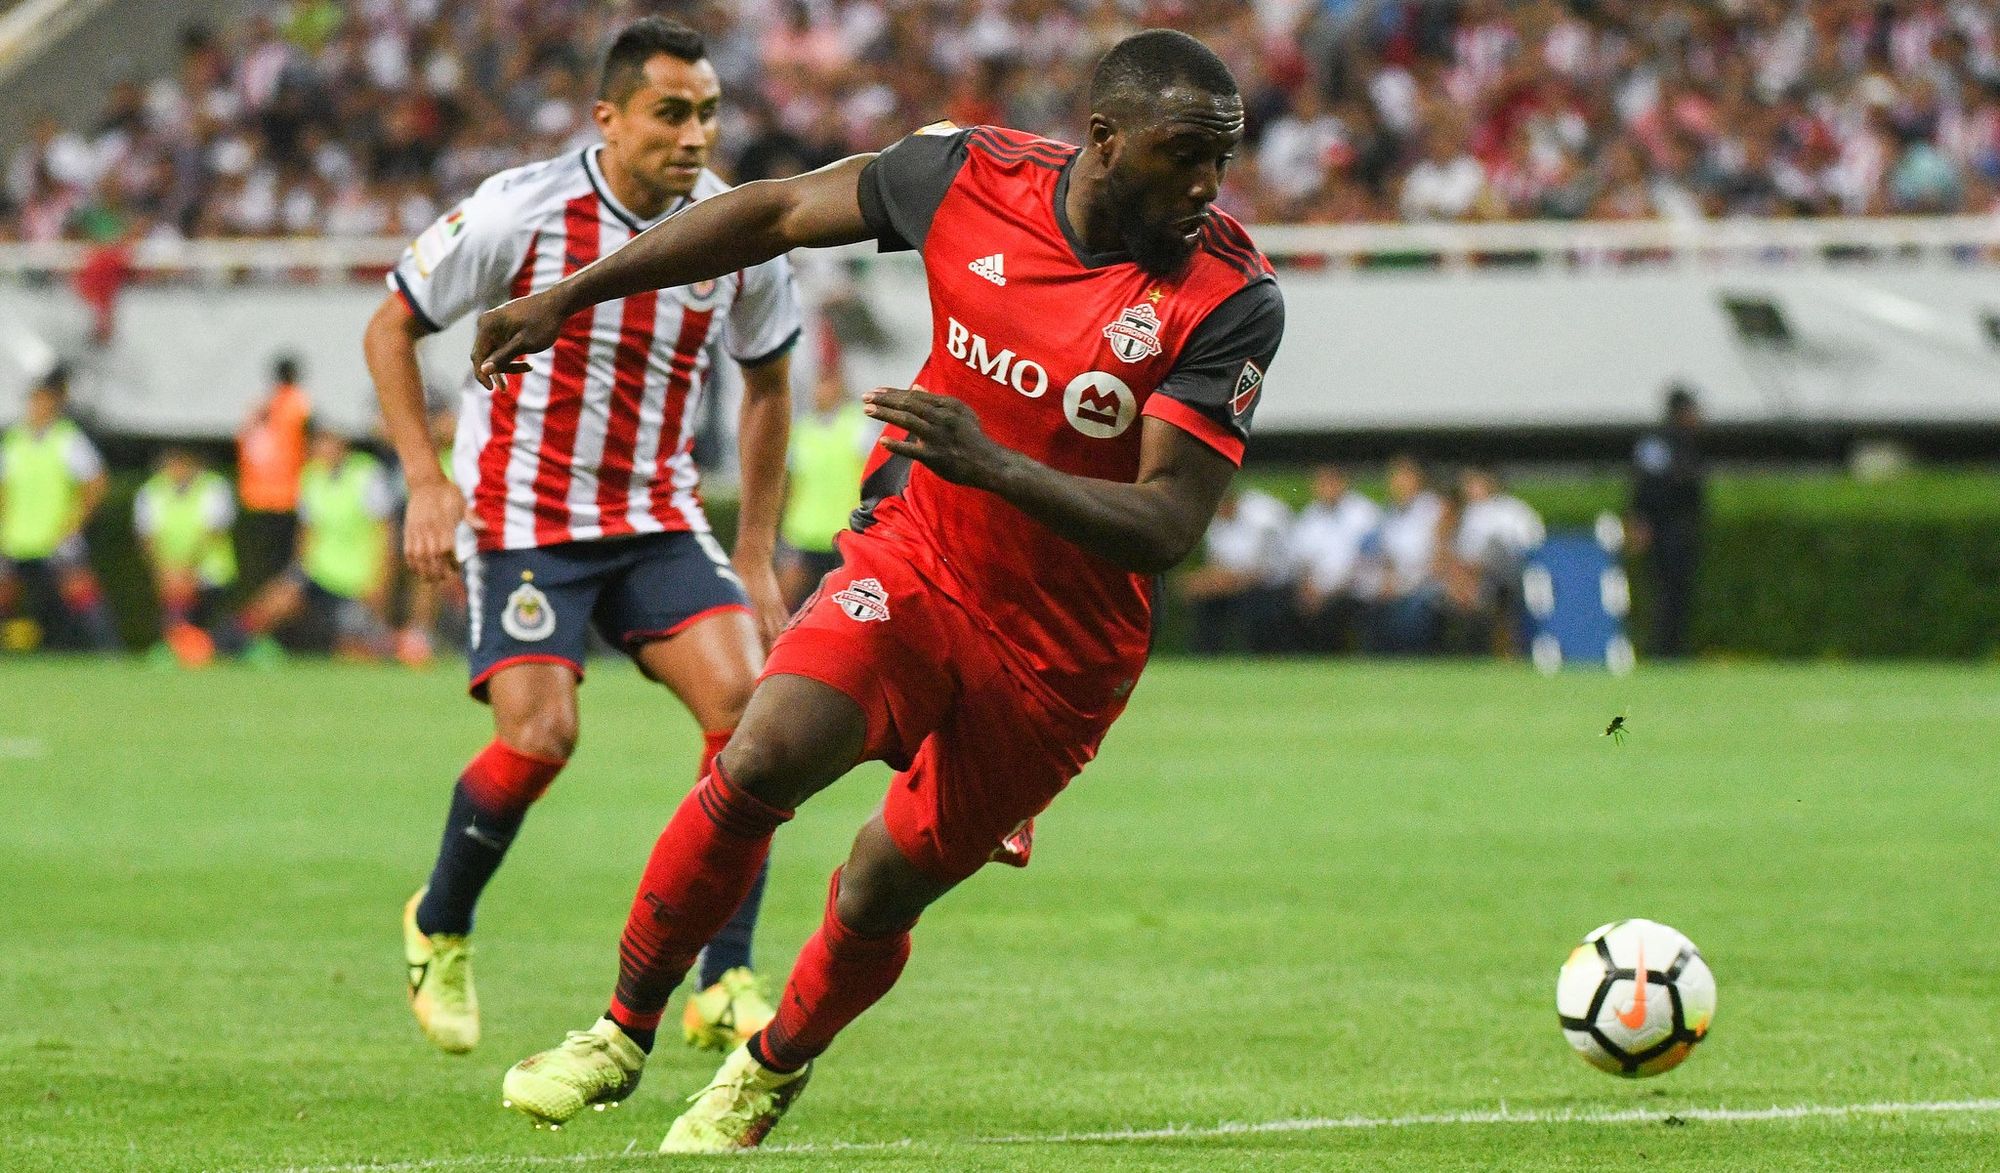 TFC Flashback: Jozy Altidore sounds off on club management